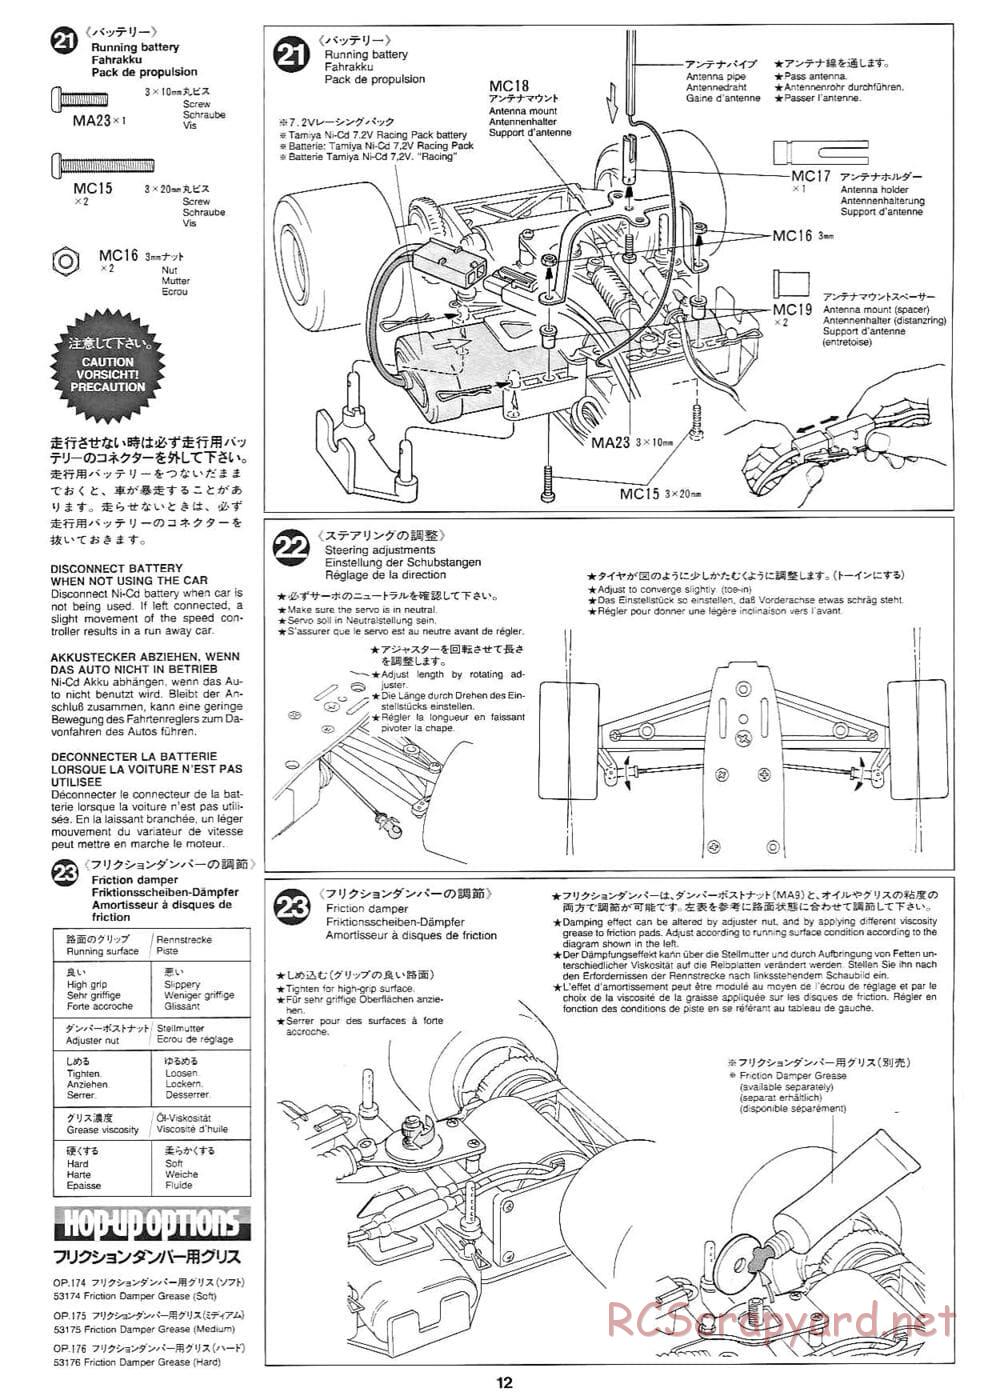 Tamiya - Toyota GT-One TS020 - F103RS Chassis - Manual - Page 12